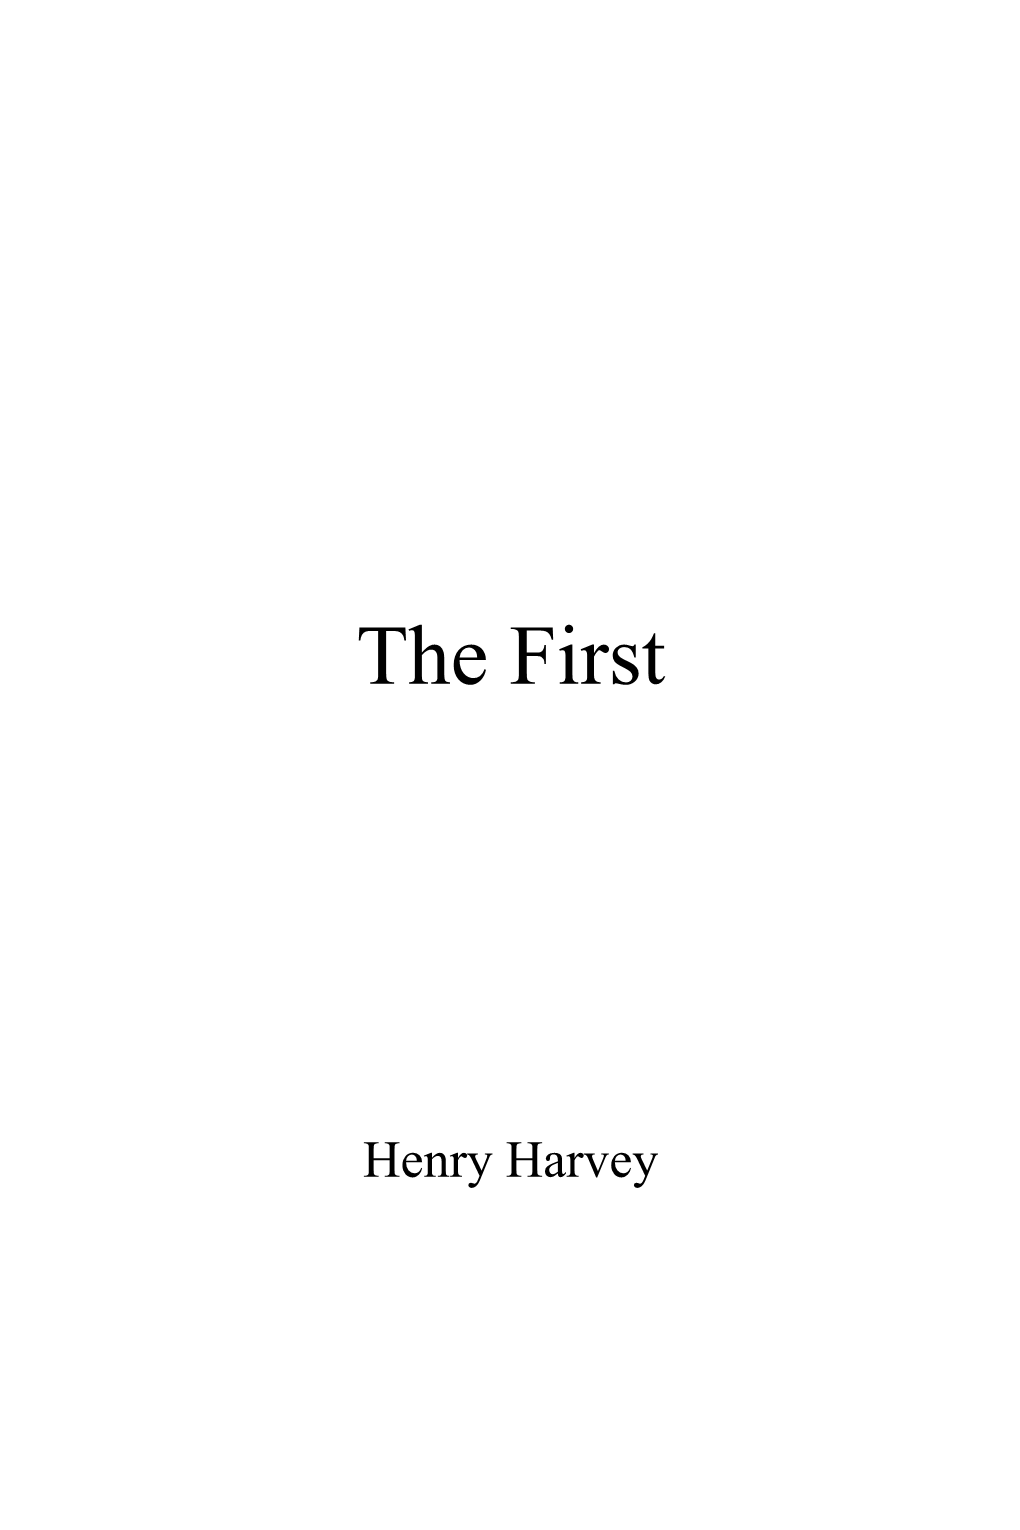 The First Is a Work of Fiction. the Characters, Events and Dialogue Are Products of The